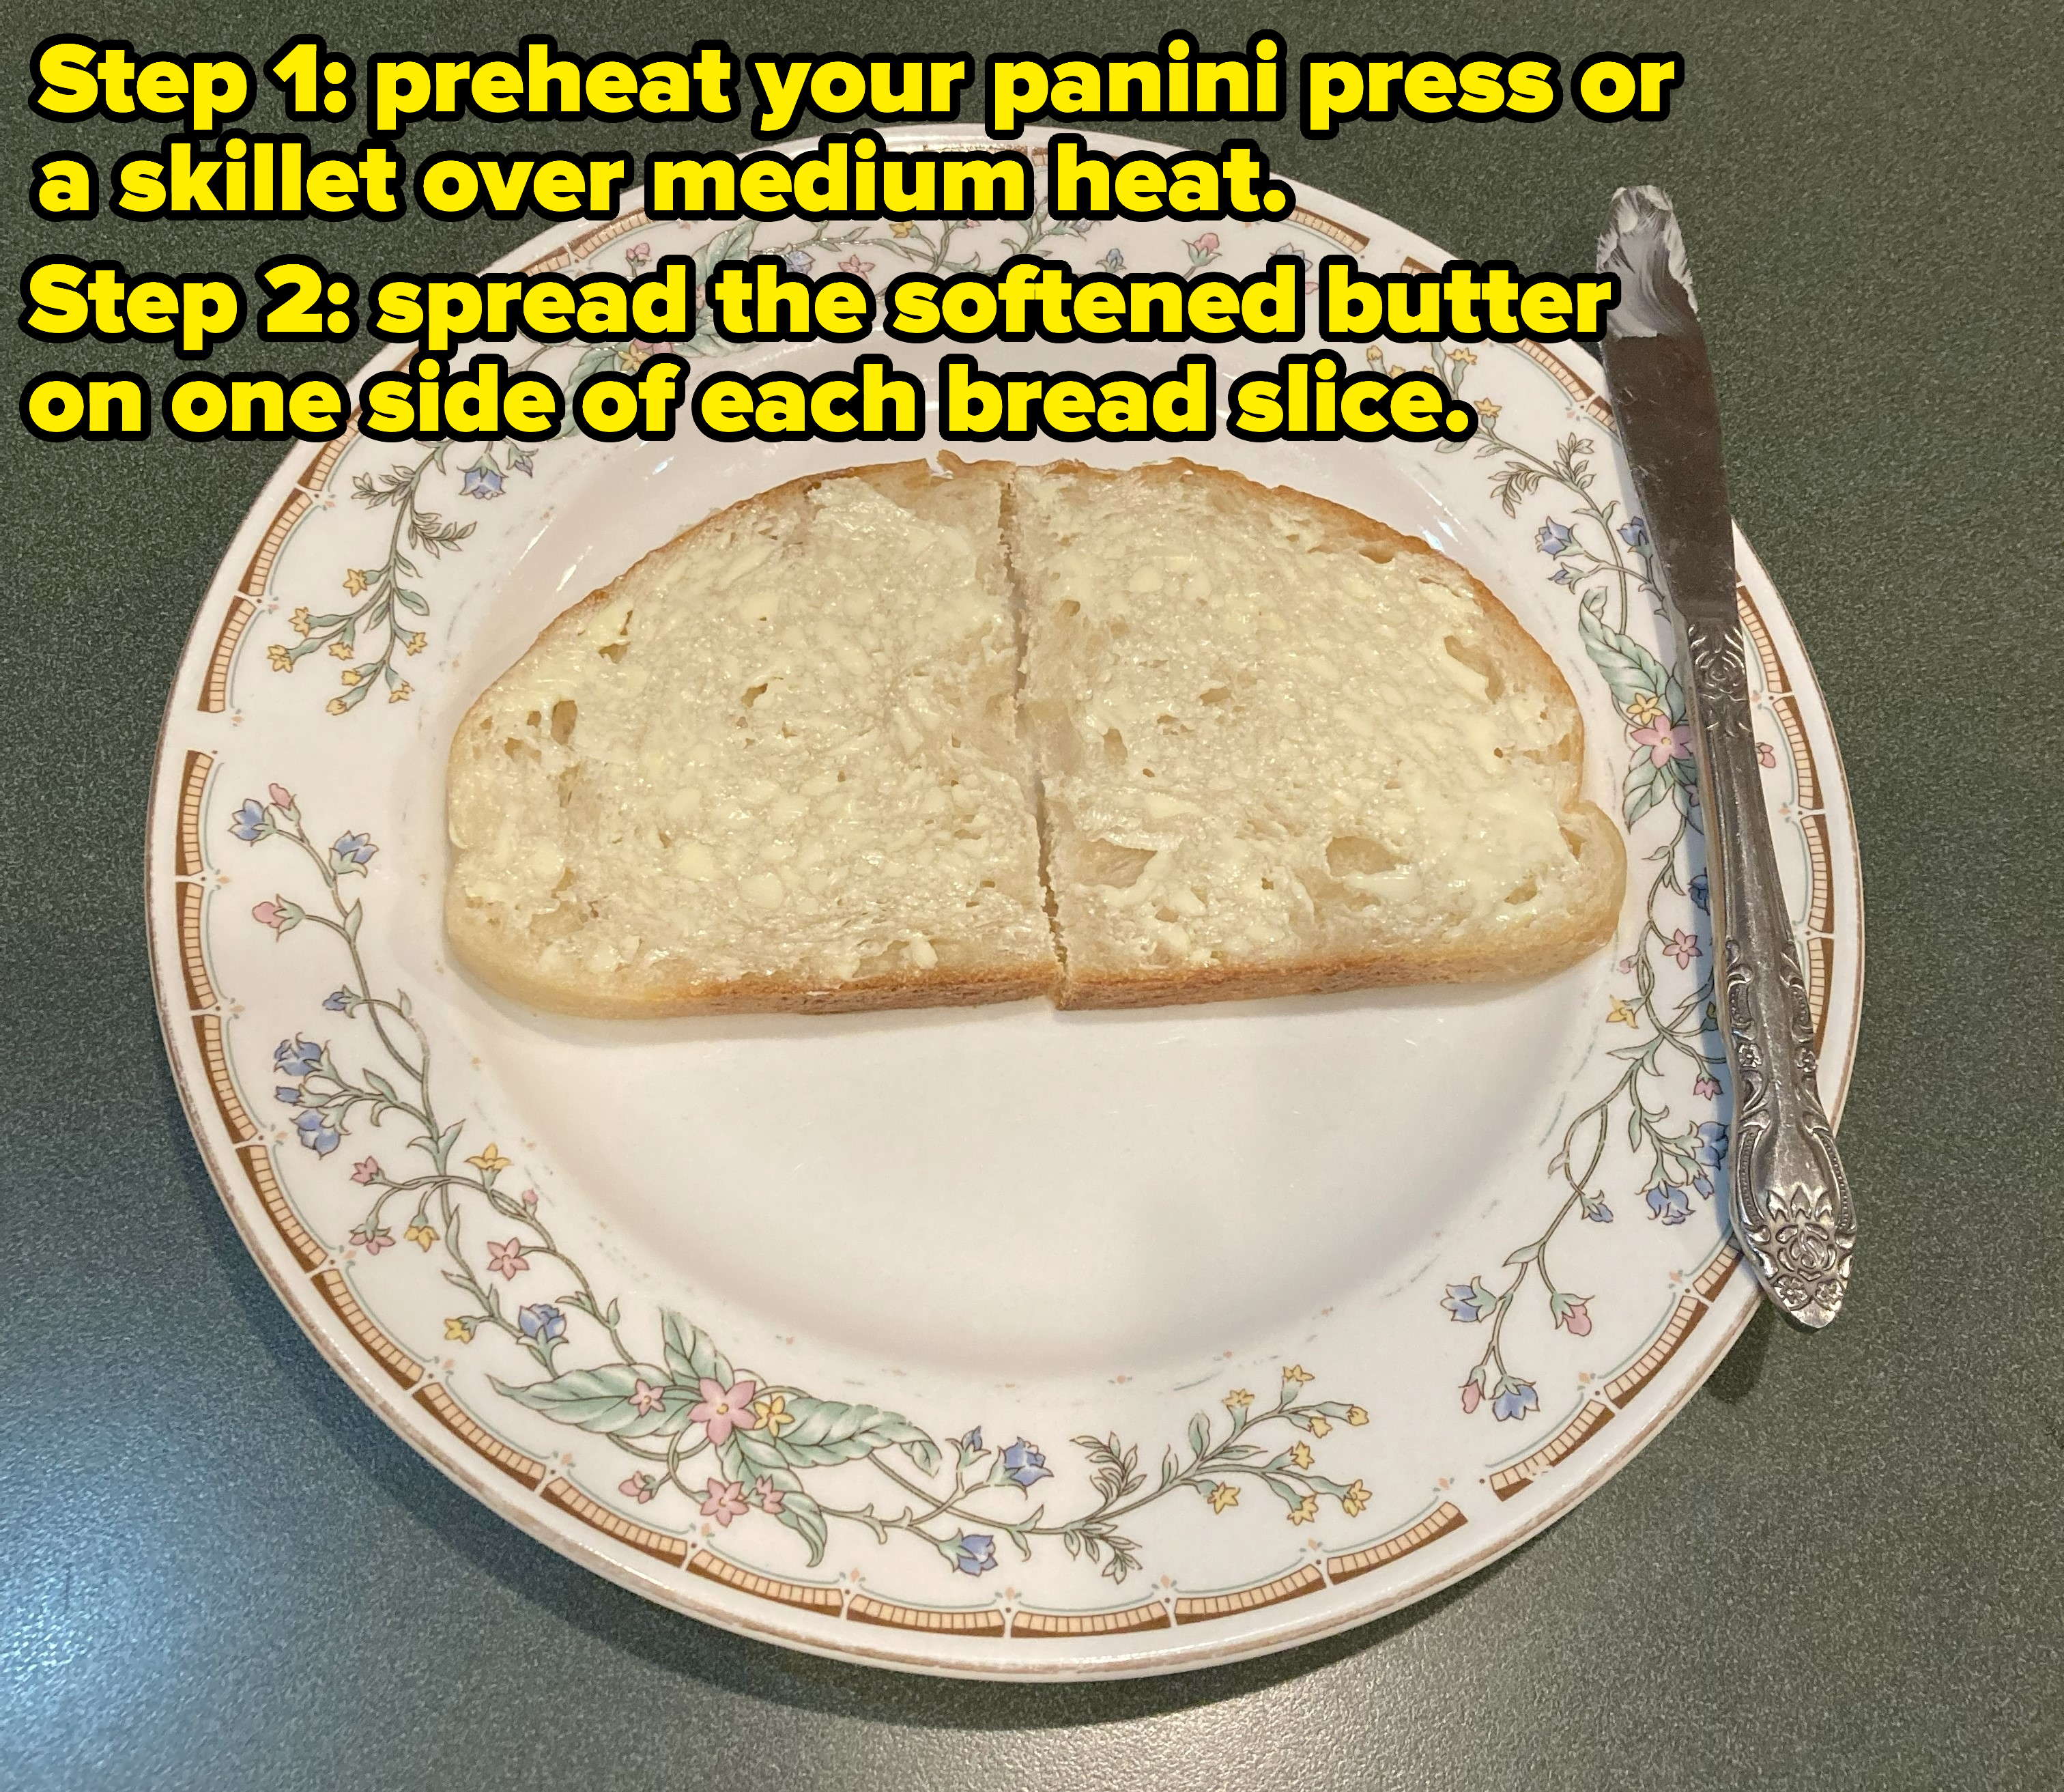 photo of step 1 and 2 with the the words &quot;preheat your panini press or skillet over medium heat&quot; and &quot;spread the softened butter on one side of each bread slice&quot;